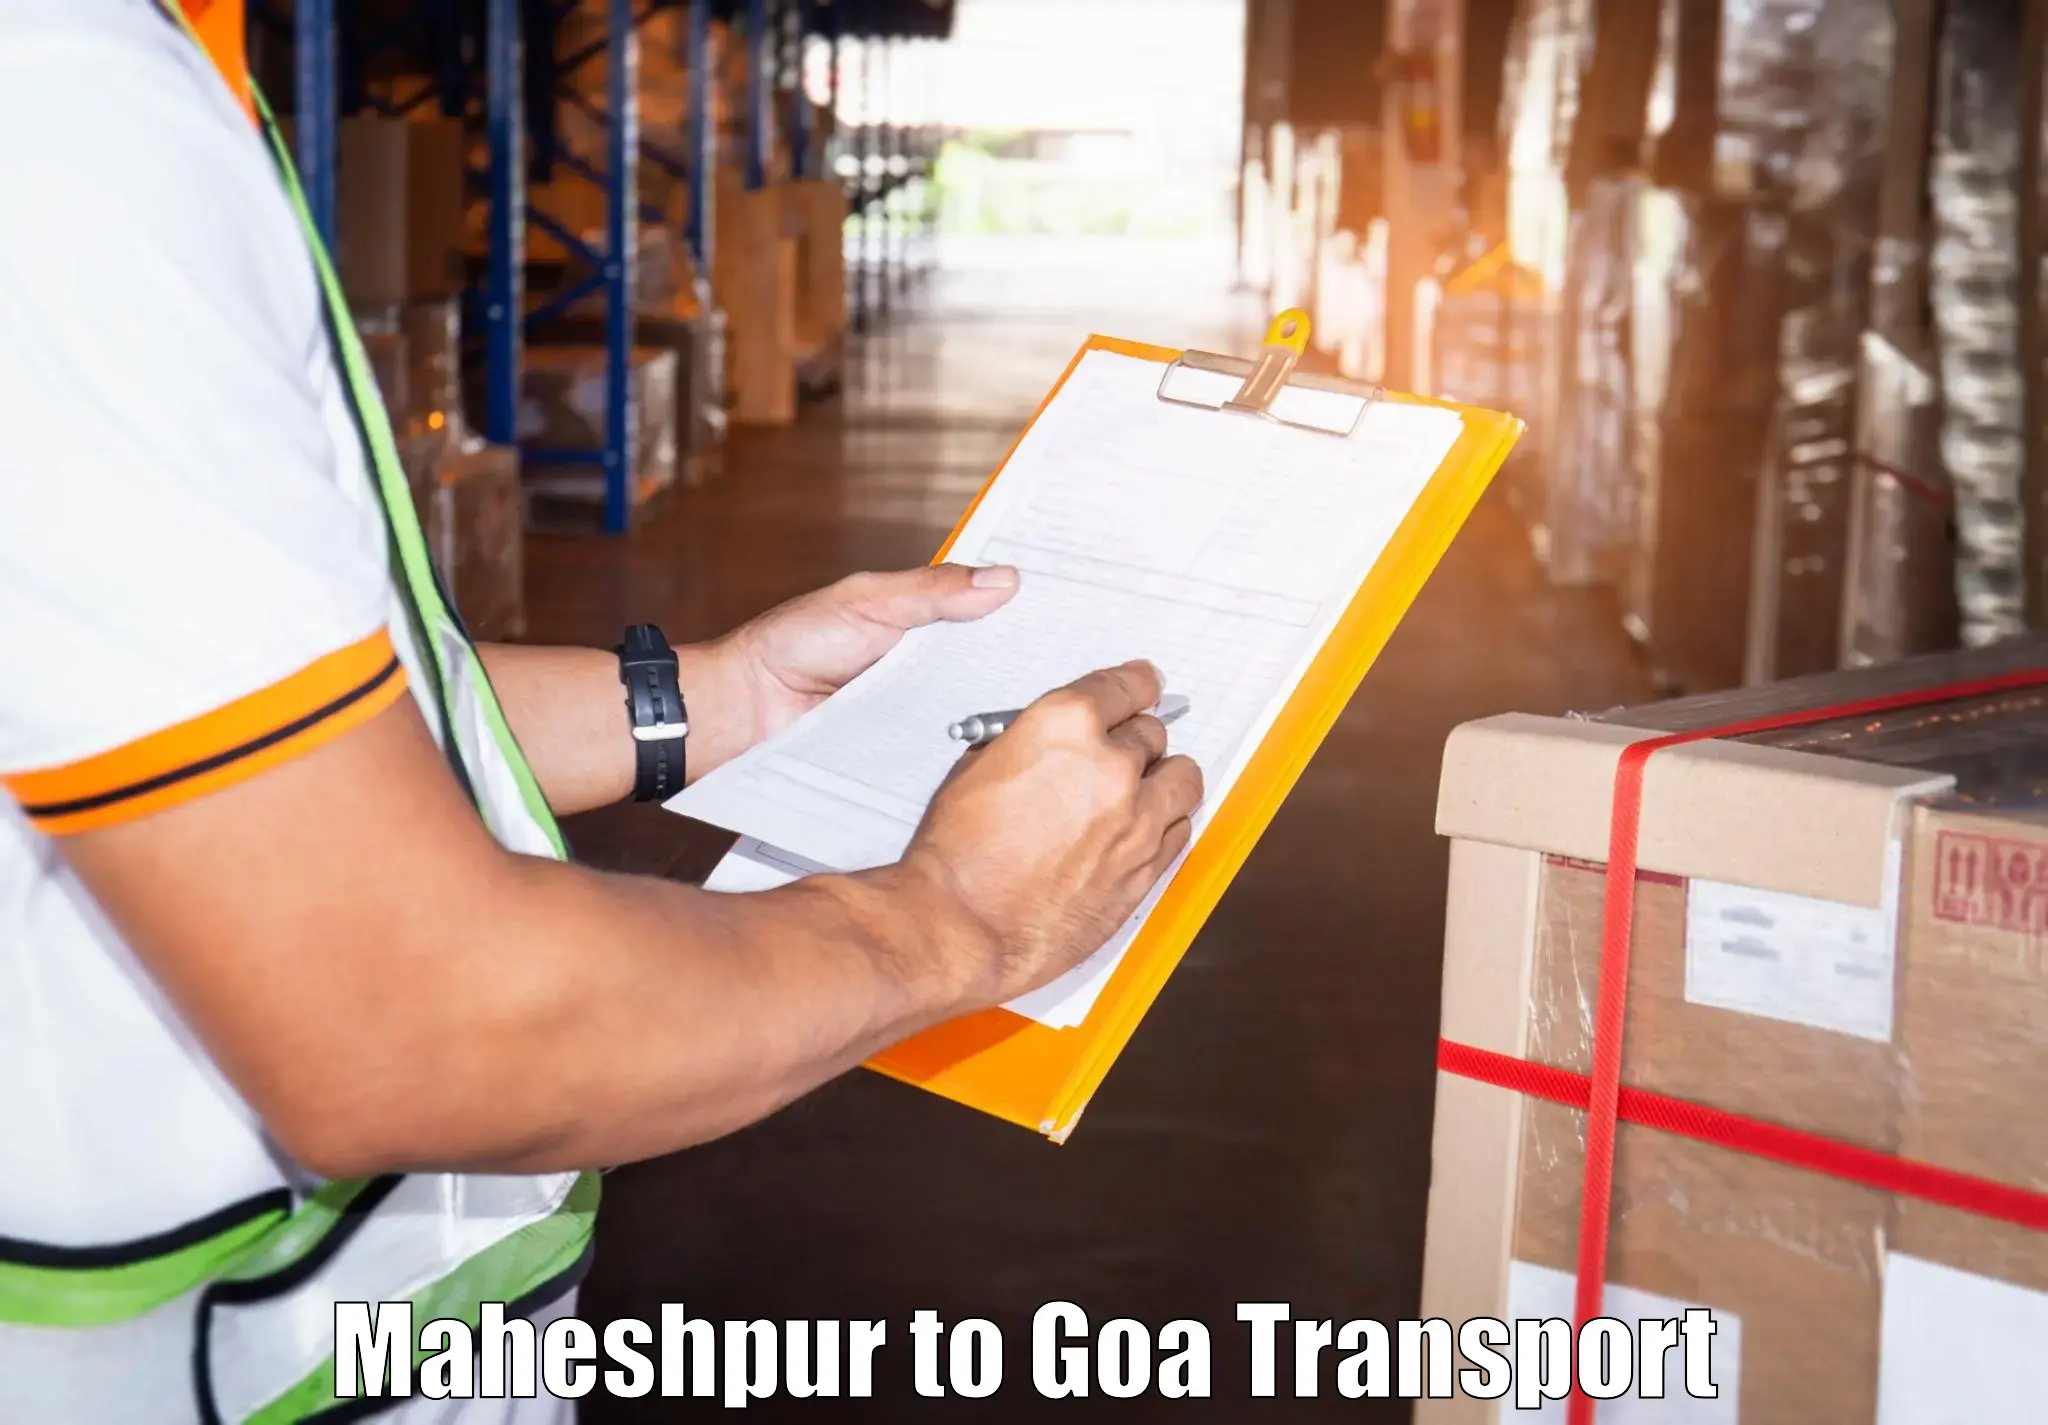 Transport bike from one state to another Maheshpur to Mormugao Port